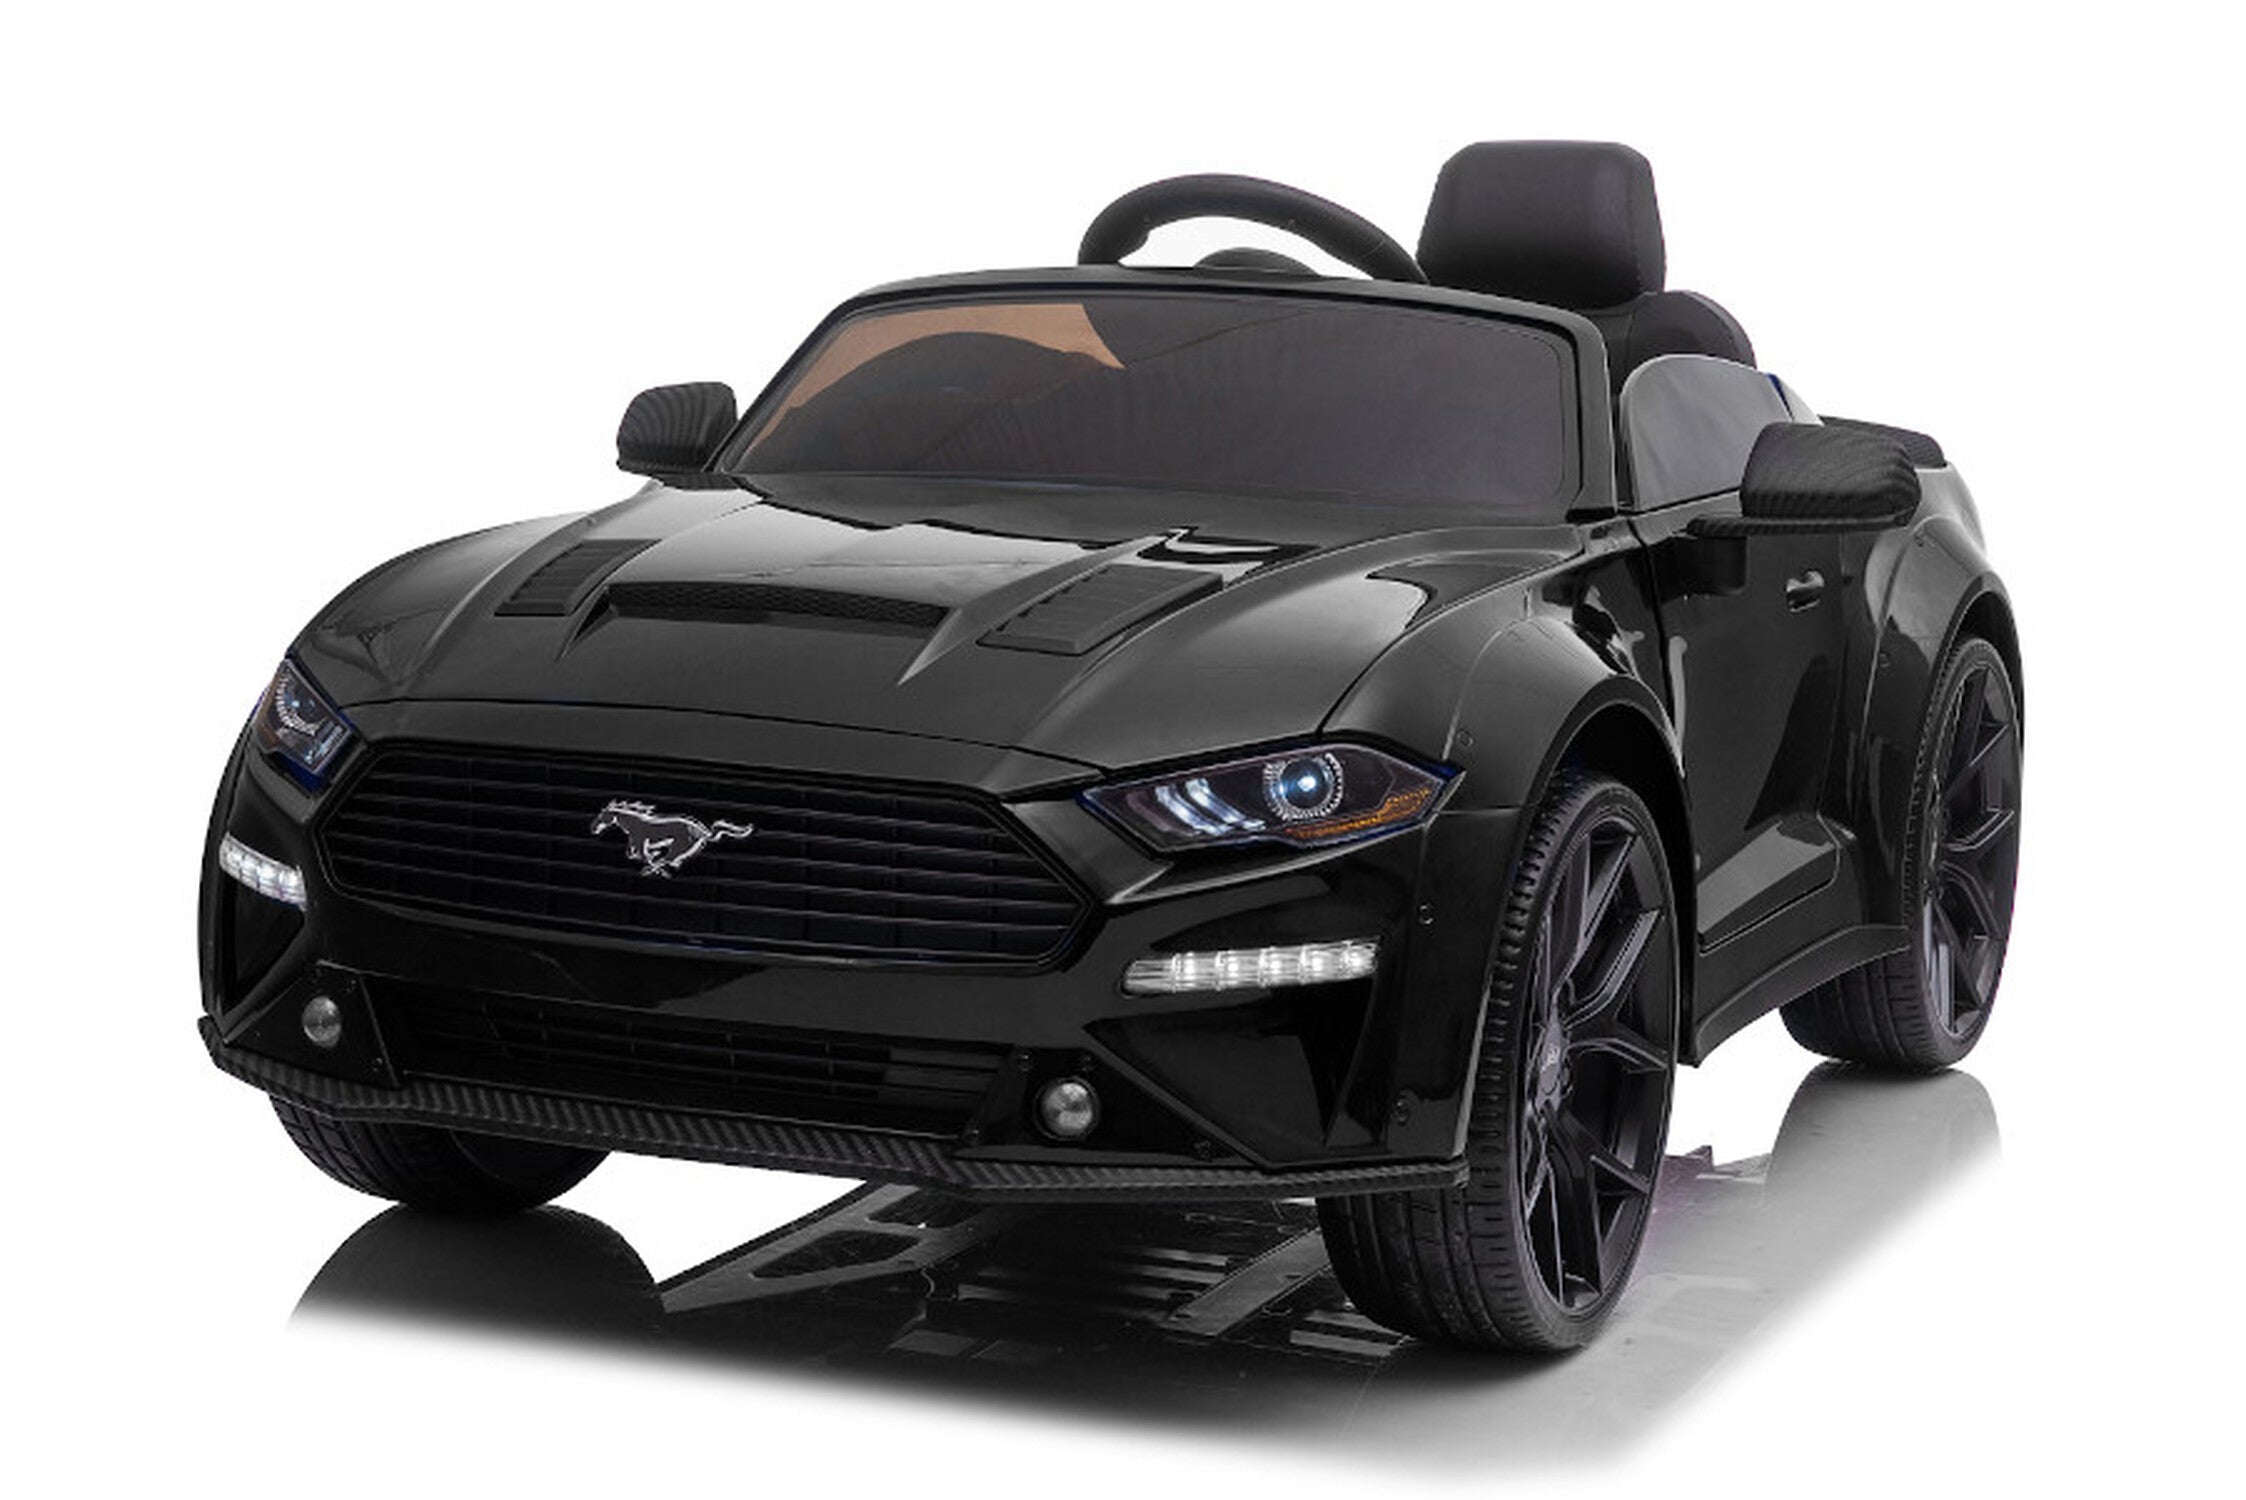 TPFLiving electric children's car Ford Mustang Drift version black -  children's car - electric car - leather seat and seat belt